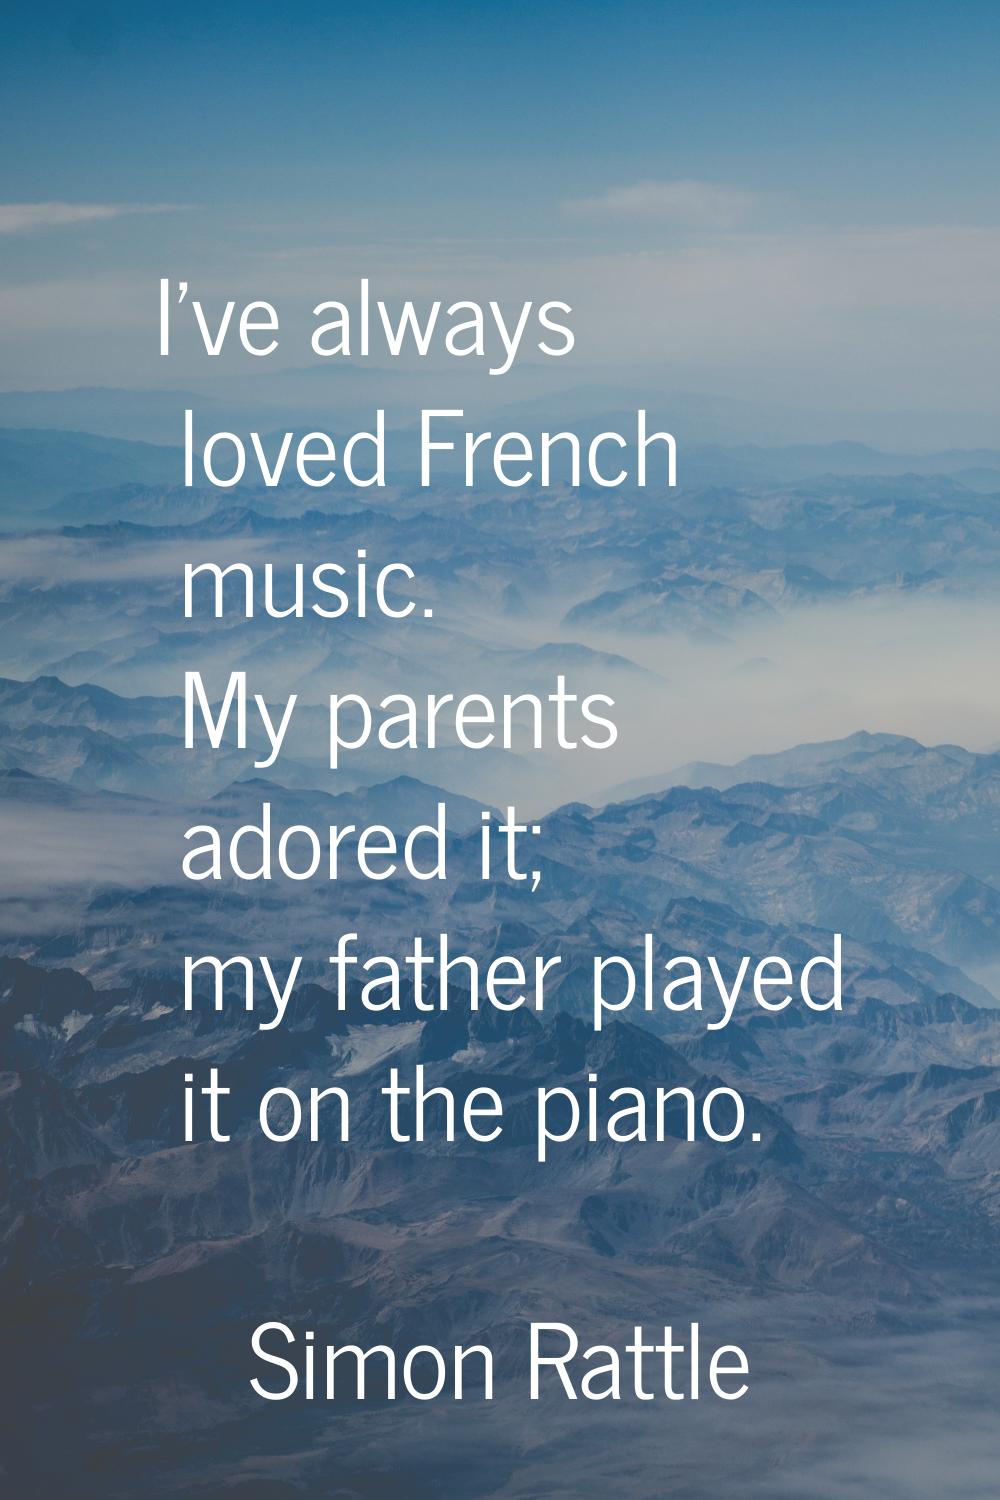 I've always loved French music. My parents adored it; my father played it on the piano.